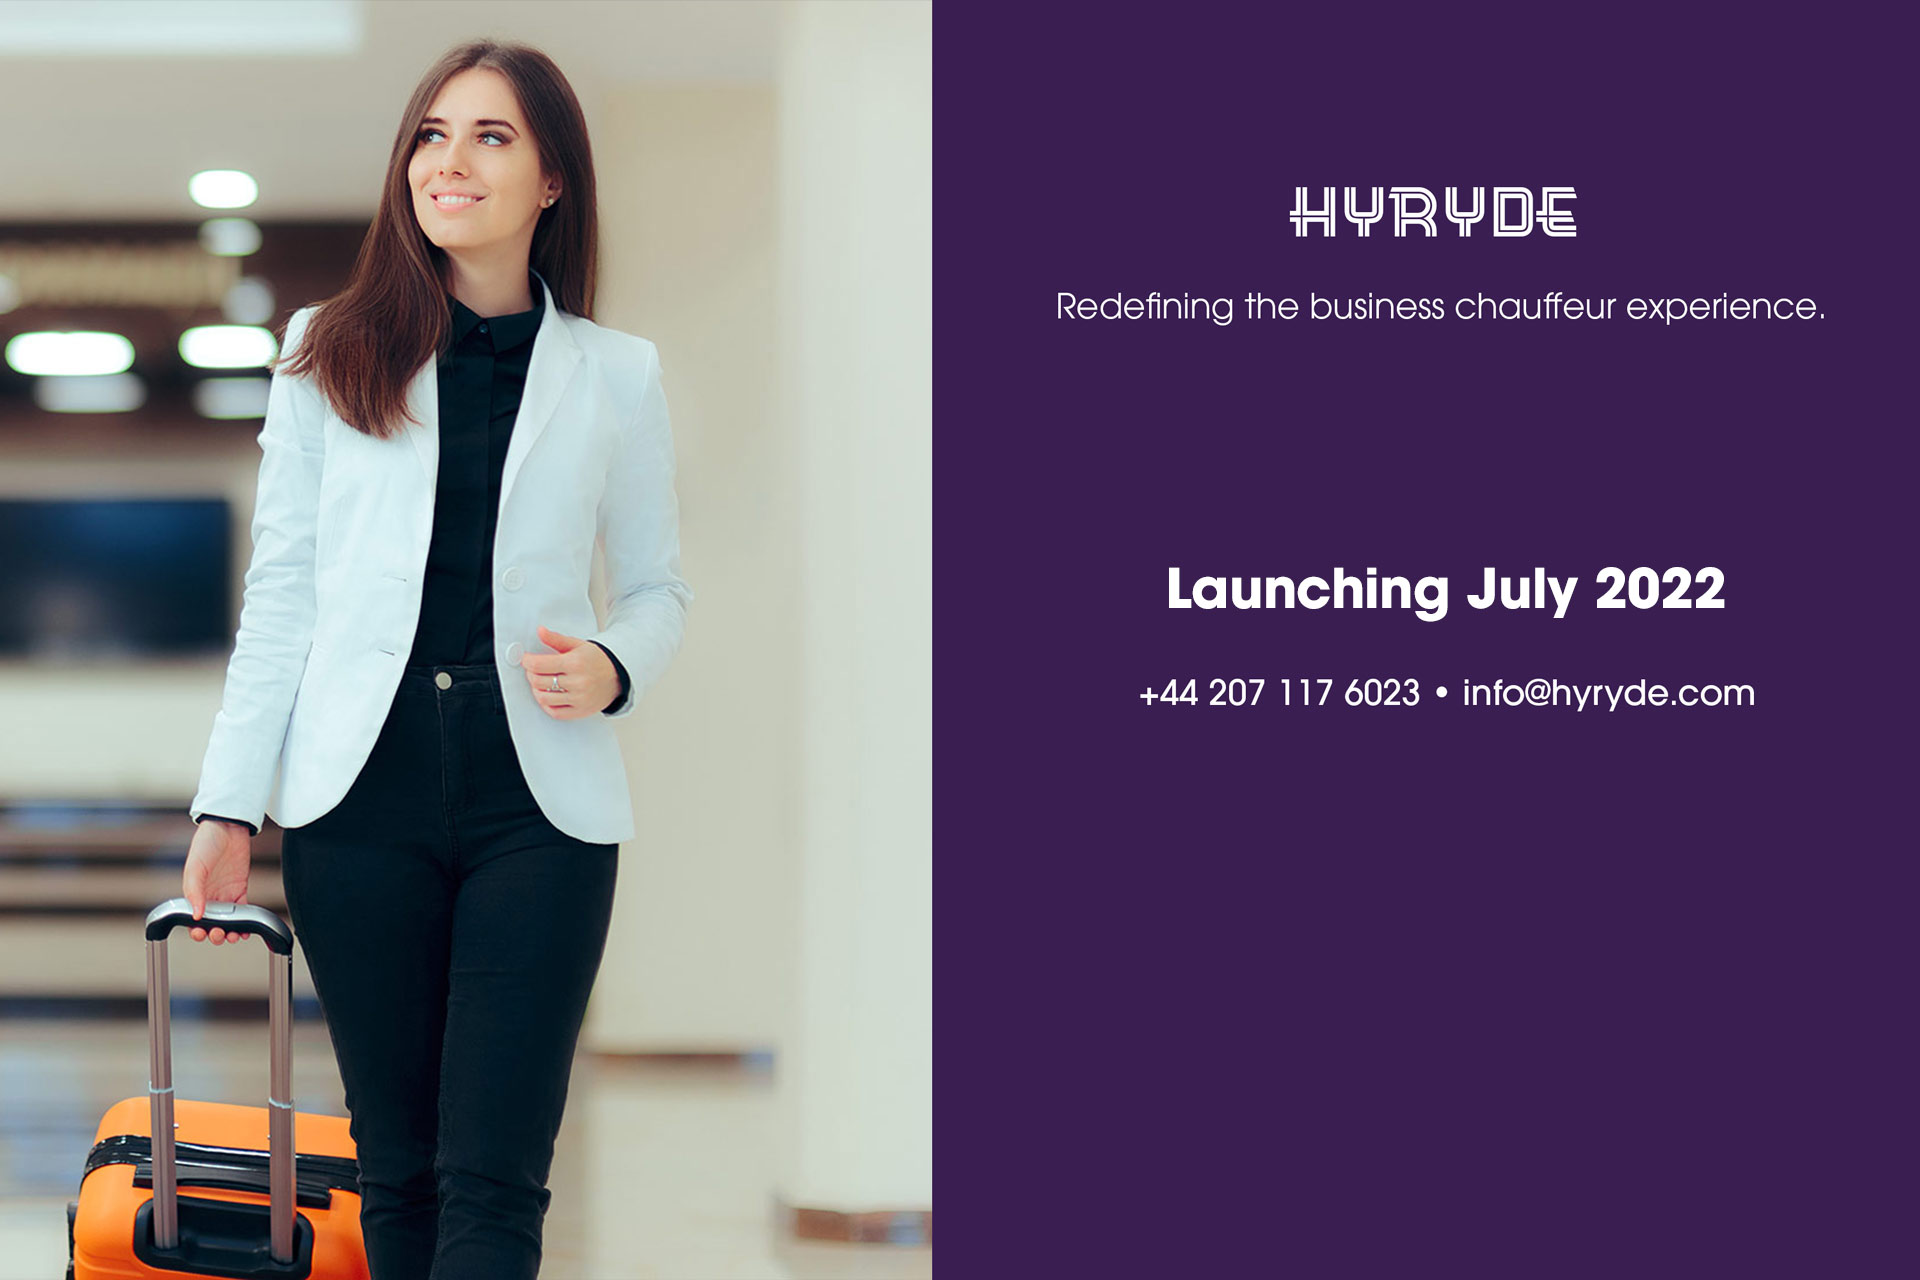 Hyryde - Launching July 2022